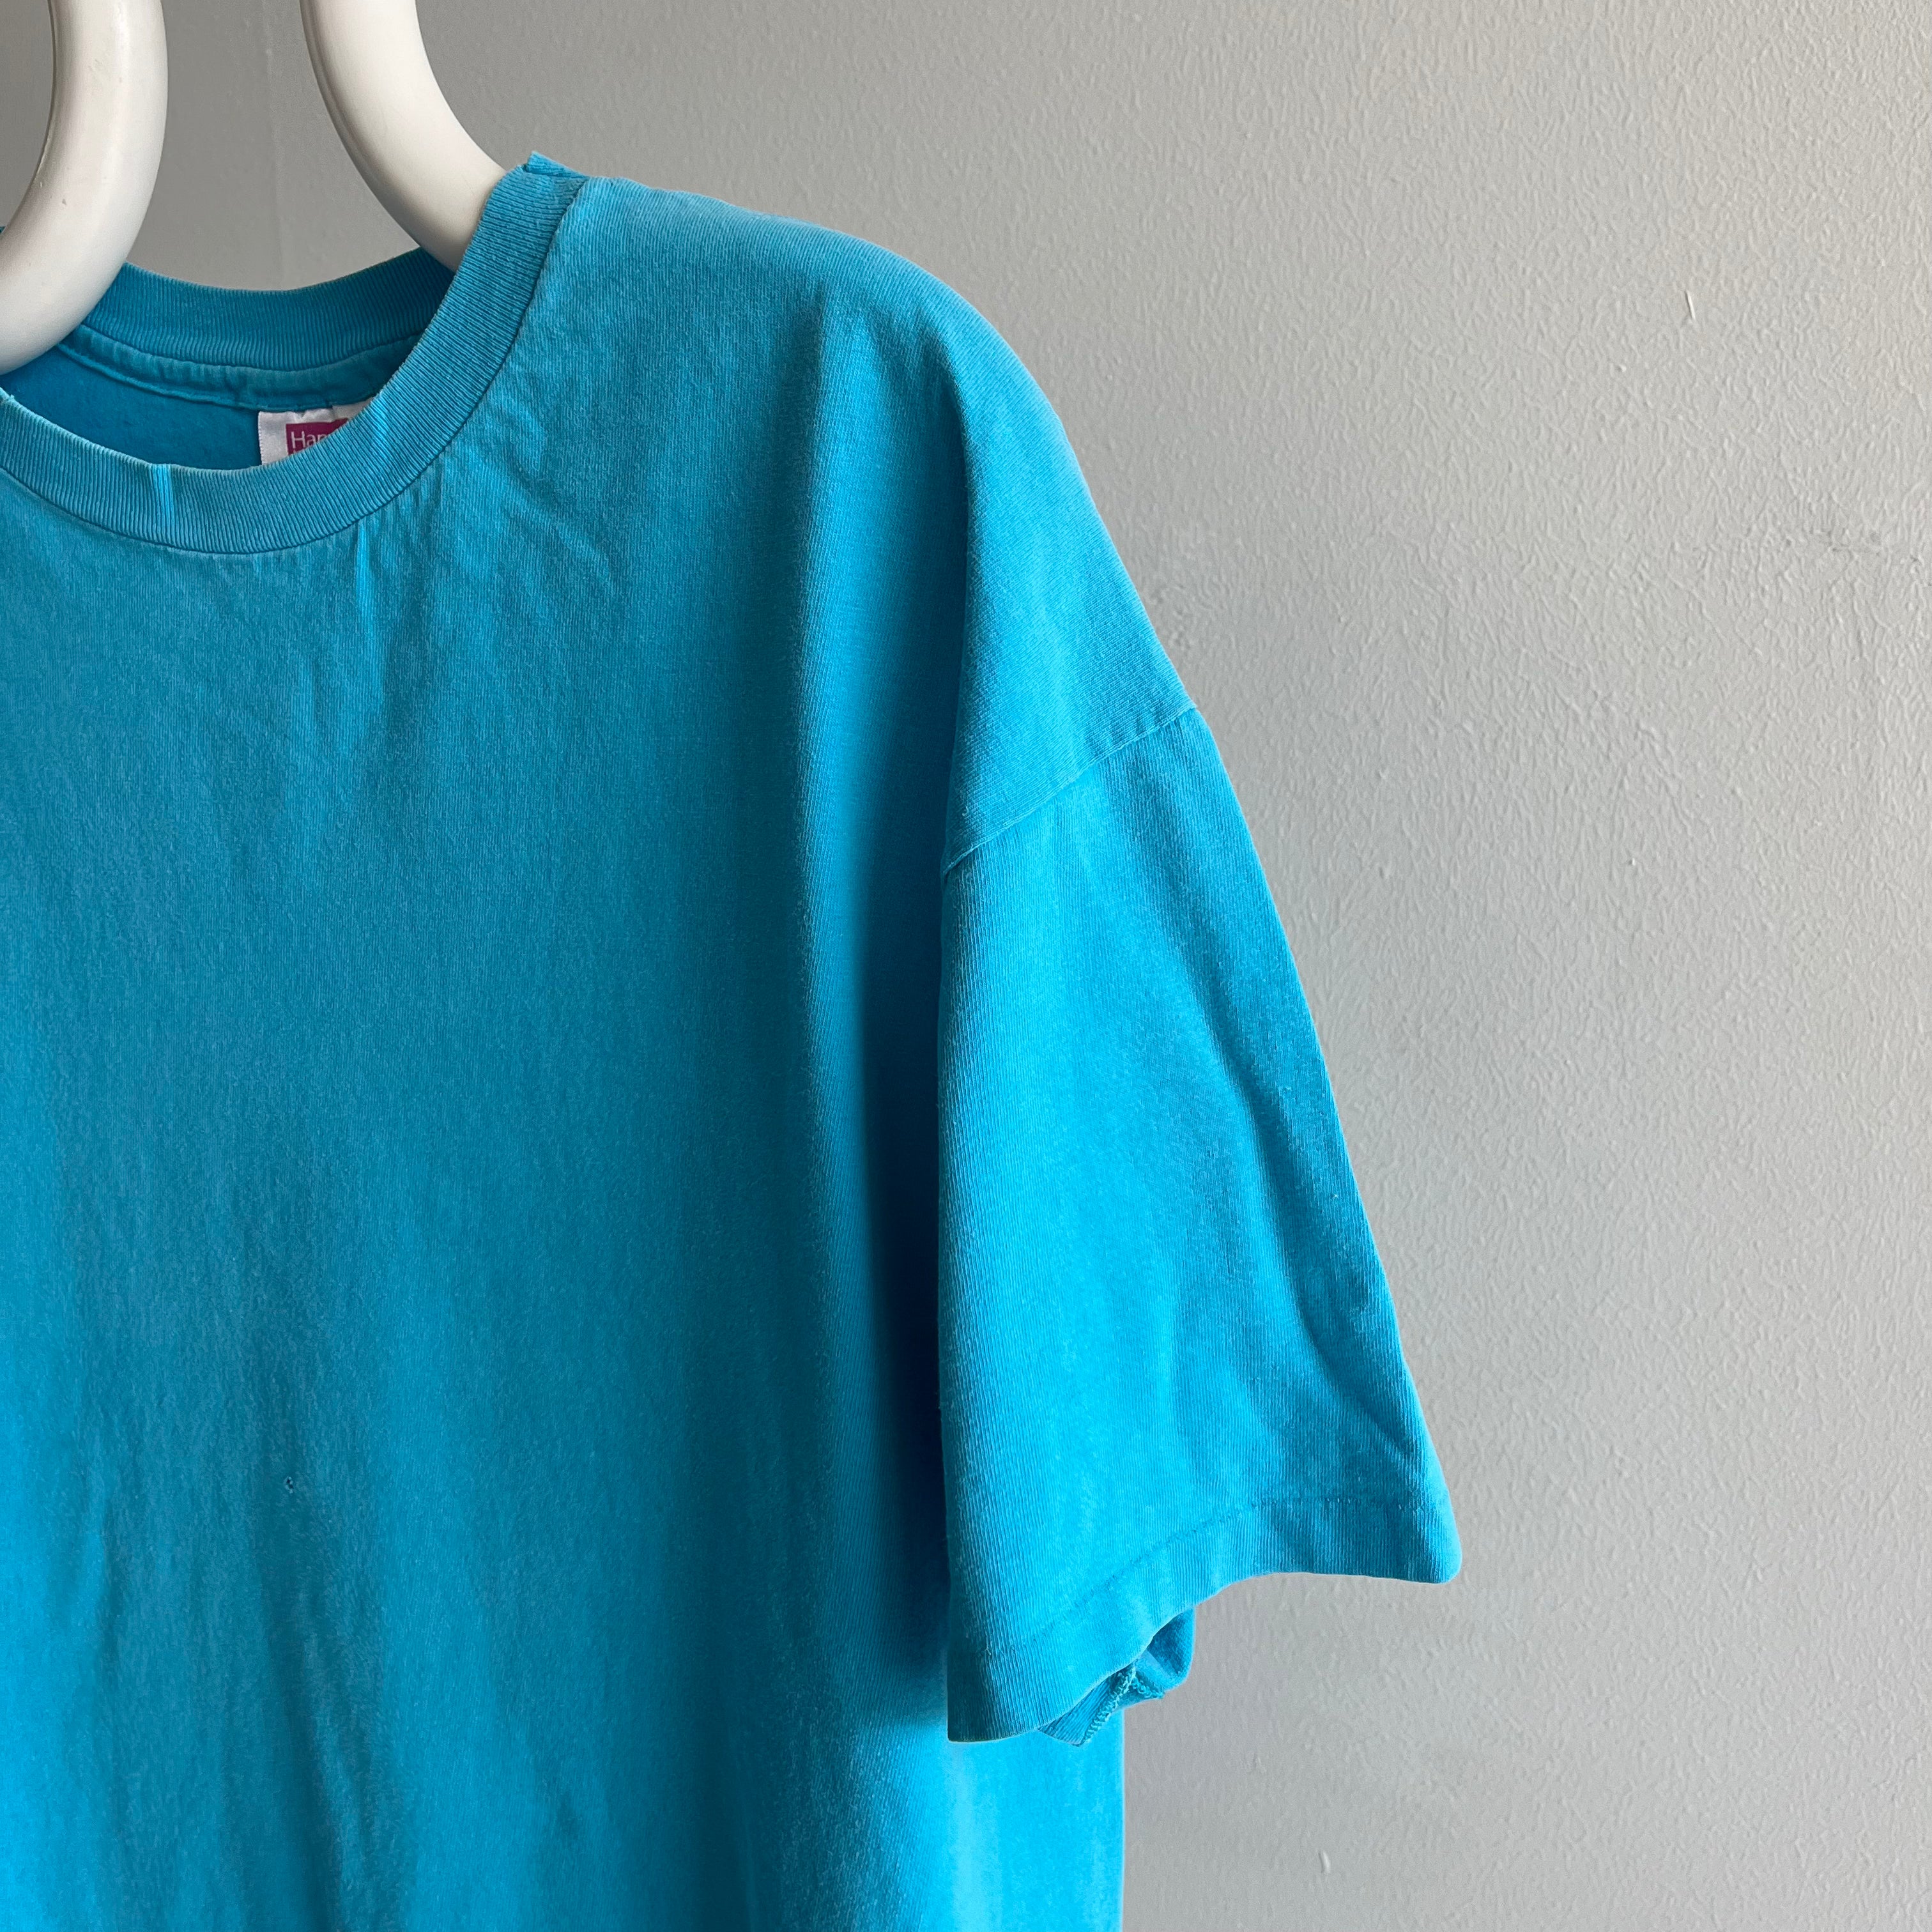 1990s HHW Blank Cotton Turquoise T-Shirt